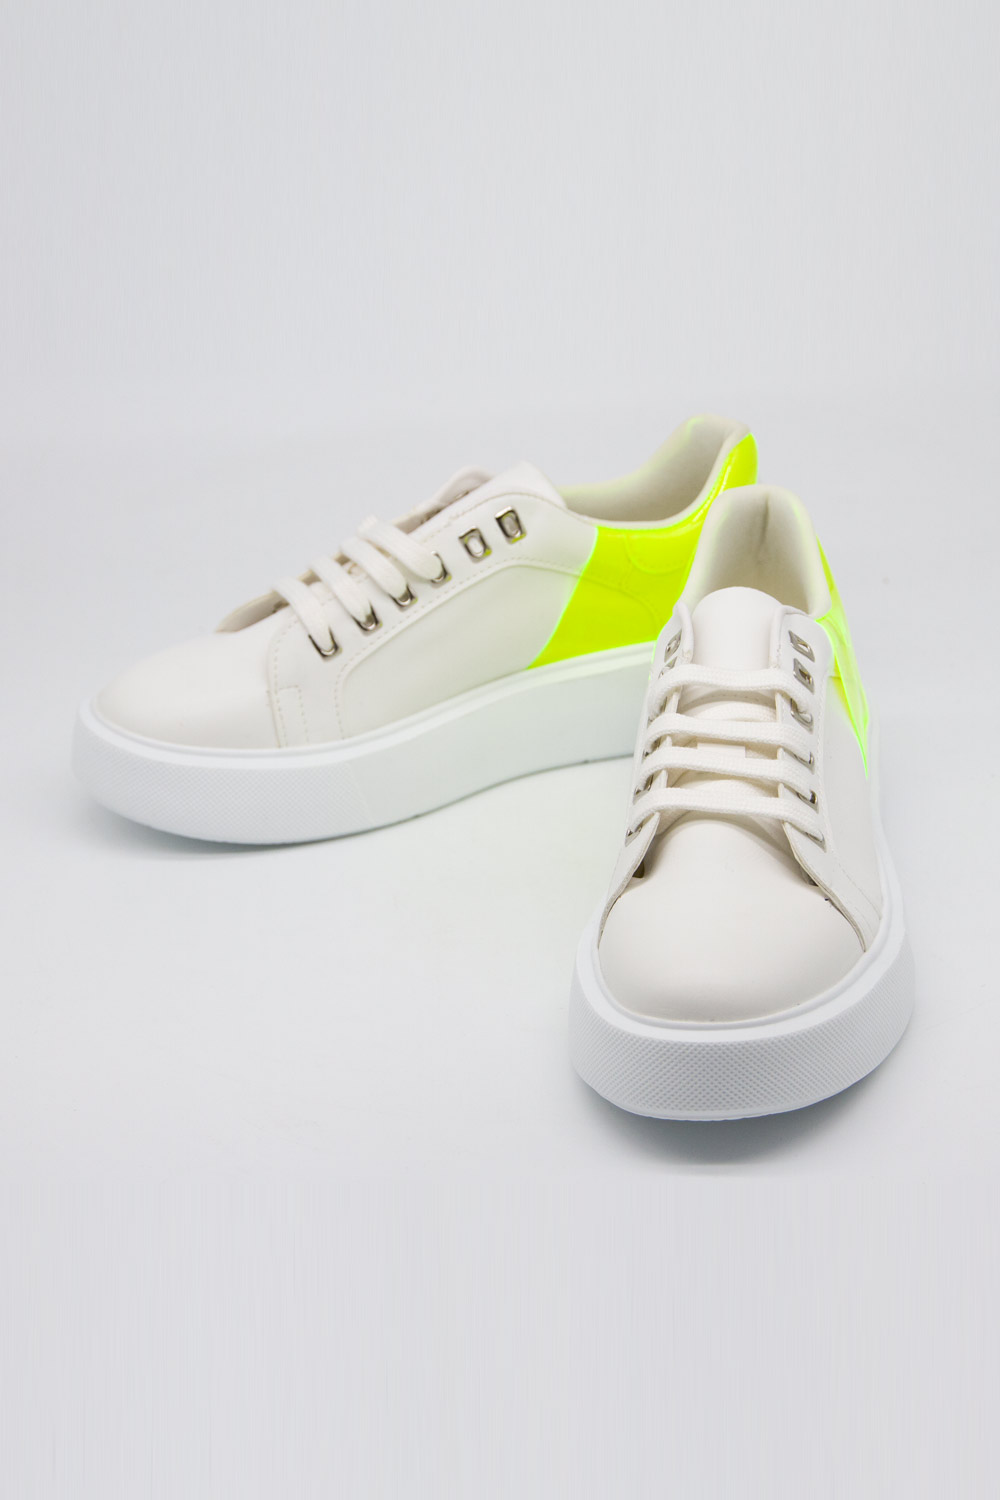 Neon Thick Sole Sneaker (Yellow)